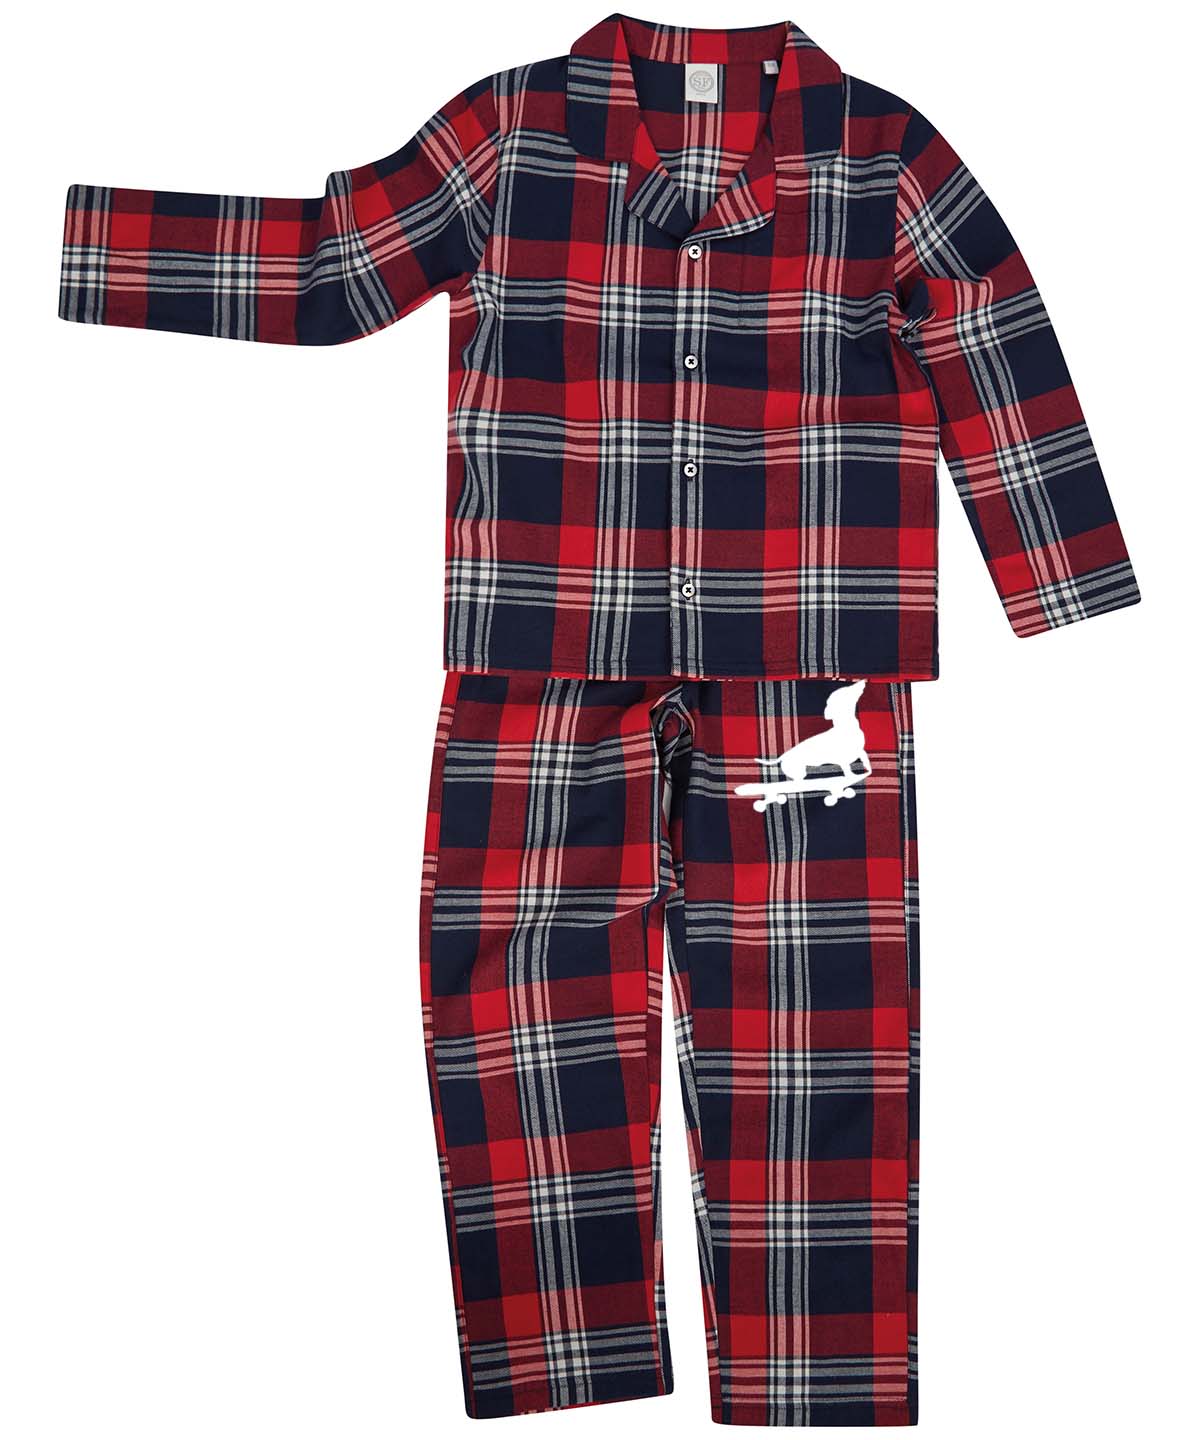  Baby PJ Pajama Pants Plaid Multi color Black White Navy Red  Green (6 Months, Red + Black) : Handmade Products